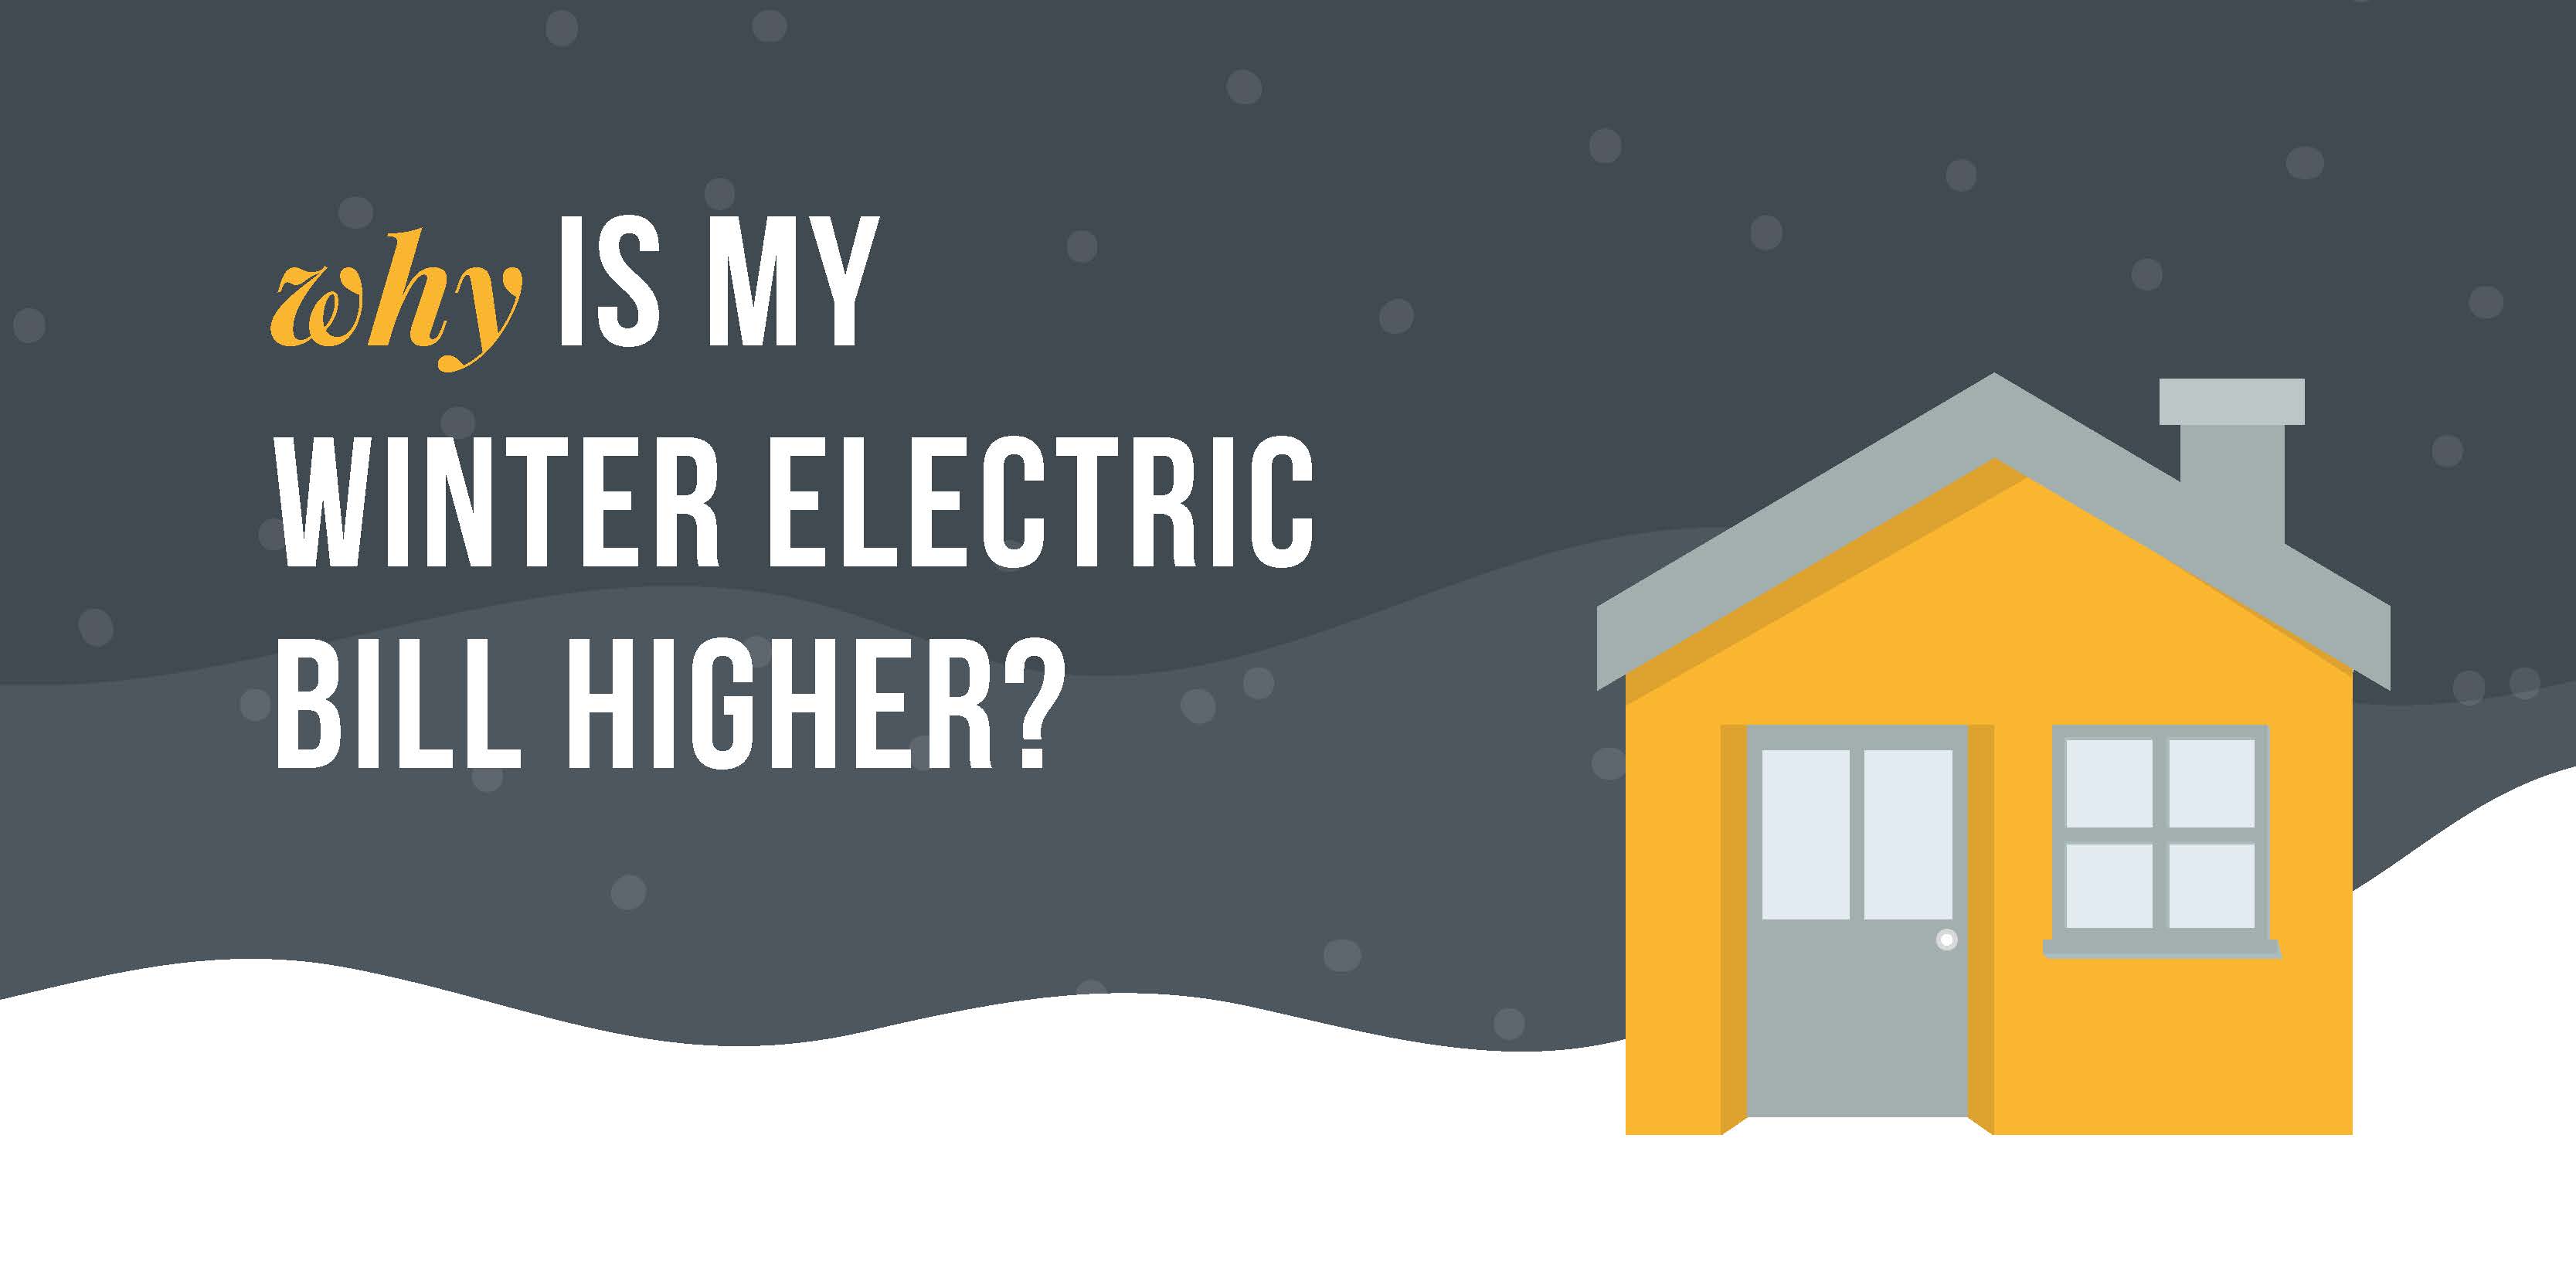 Image of a house in the snow with the text "Why is my Winter Electric Bill Higher"